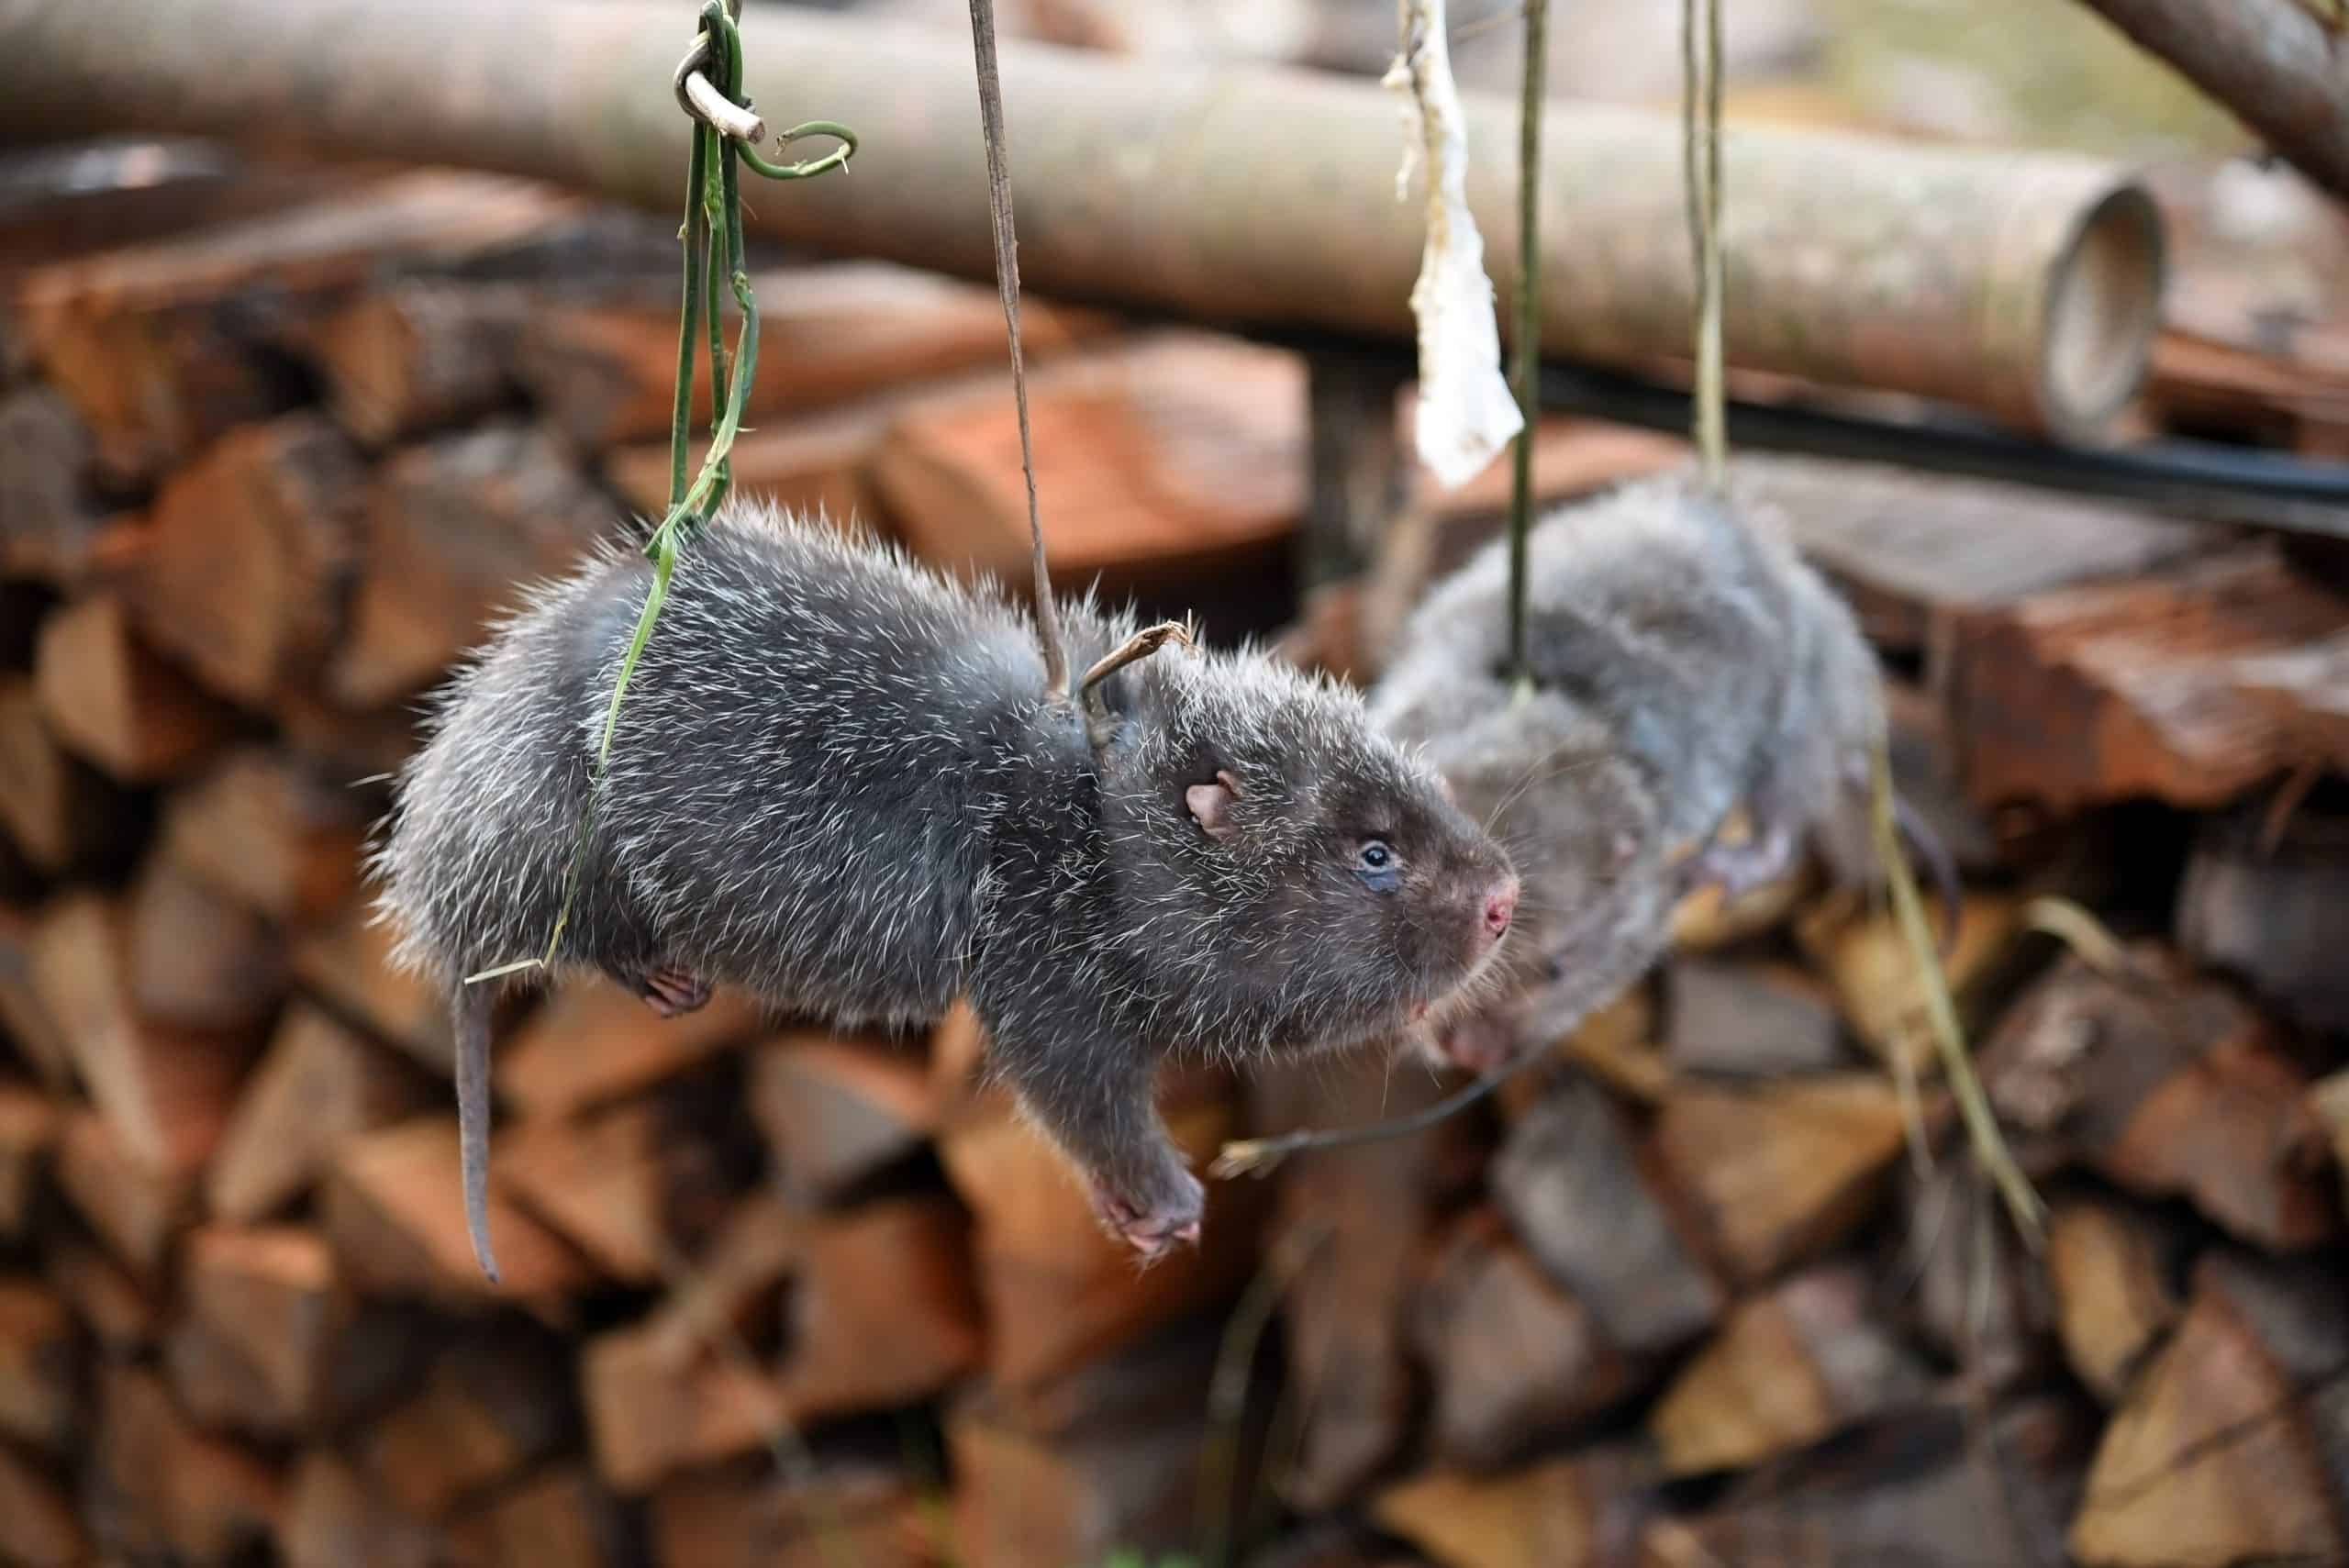 Petition: Lead Epidemiologist Says Coronavirus May be Linked to Breeding of Huge Rats in China Consumed to Detoxify the Body